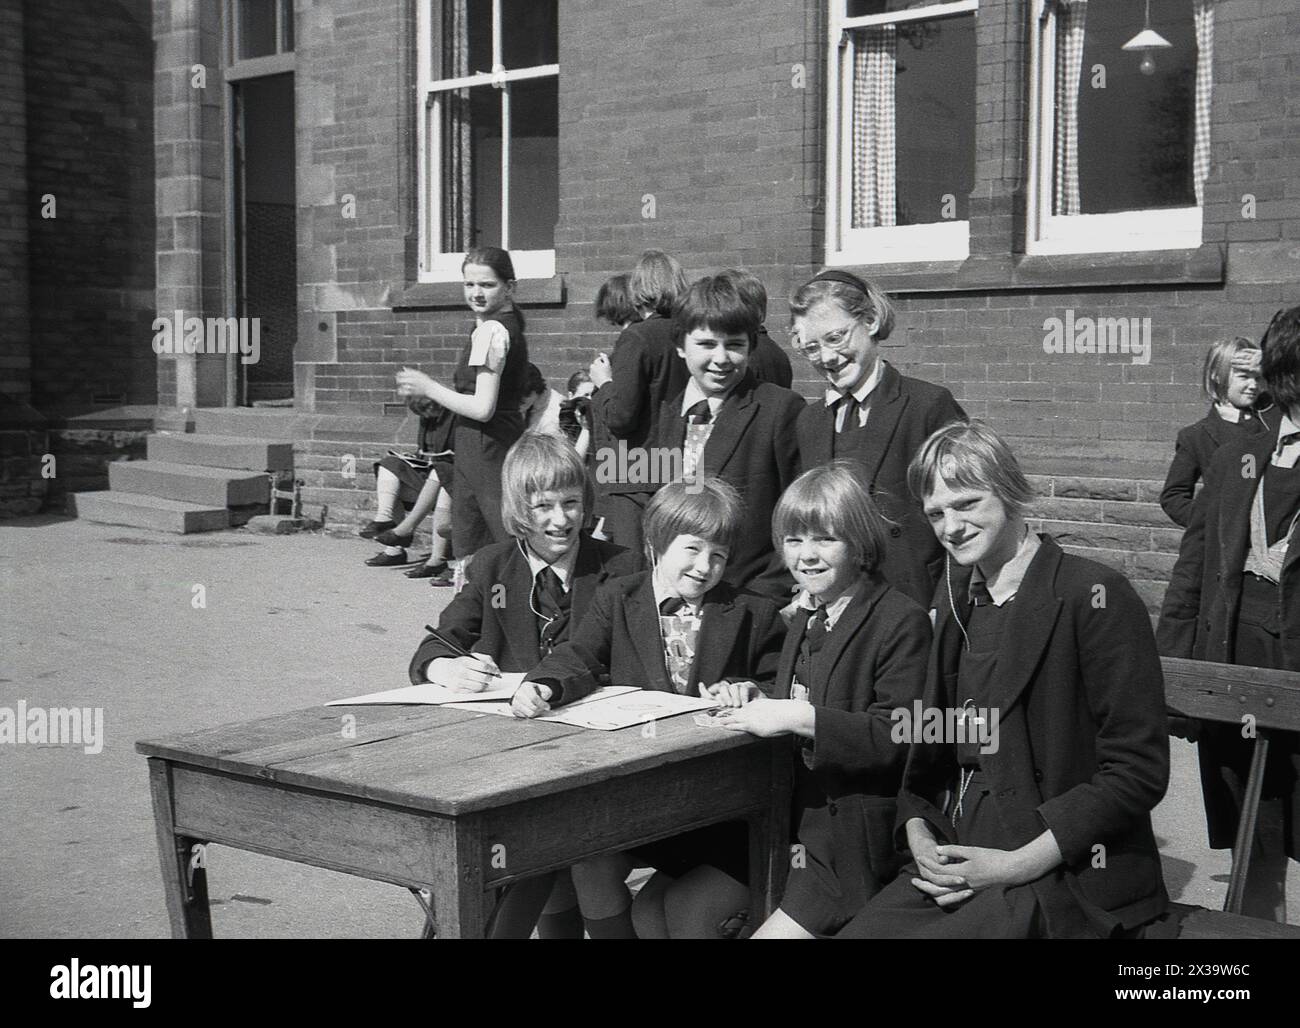 1960s, historical, early summertime and roman catholic schoolgirls in their uniforms sitting outside their school building, with pen and paper, doing their school work at a wooden desk, England, UK. Stock Photo